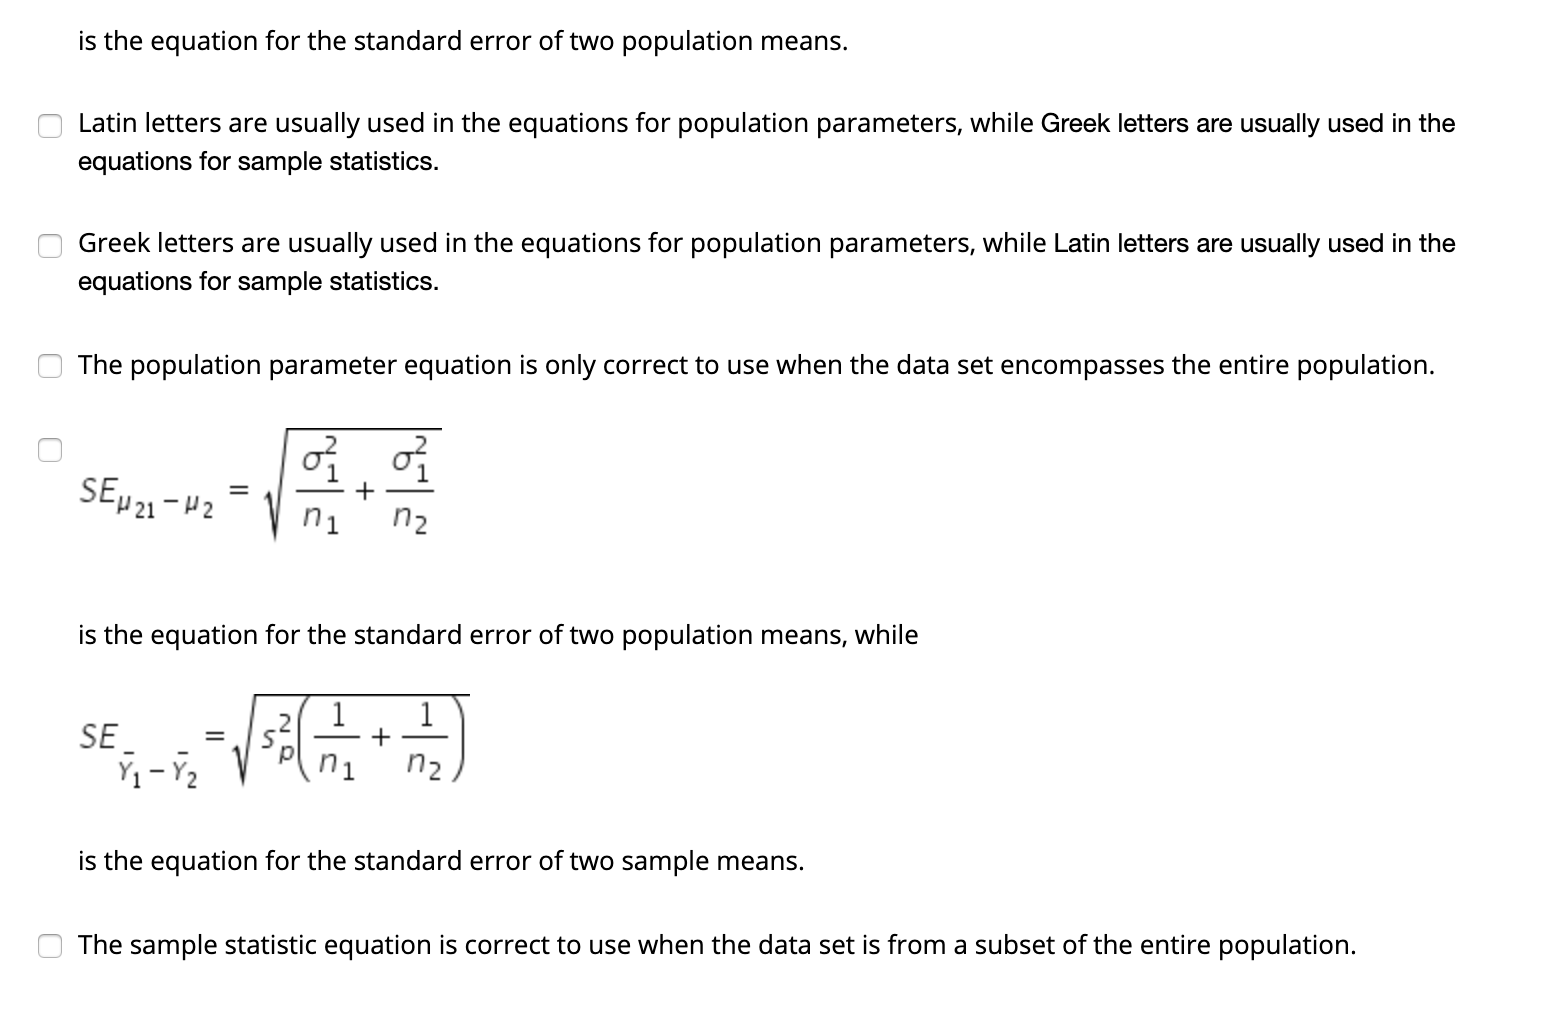 is the equation for the standard error of two population means.
Latin letters are usually used in the equations for population parameters, while Greek letters are usually used in the
equations for sample statistics.
Greek letters are usually used in the equations for population parameters, while Latin letters are usually used in the
equations for sample statistics.
The population parameter equation is only correct to use when the data set encompasses the entire population.
SEP21-42
n1
n2
is the equation for the standard error of two population means, while
SE
n1
n2
is the equation for the standard error of two sample means.
The sample statistic equation is correct to use when the data set is from a subset of the entire population.
